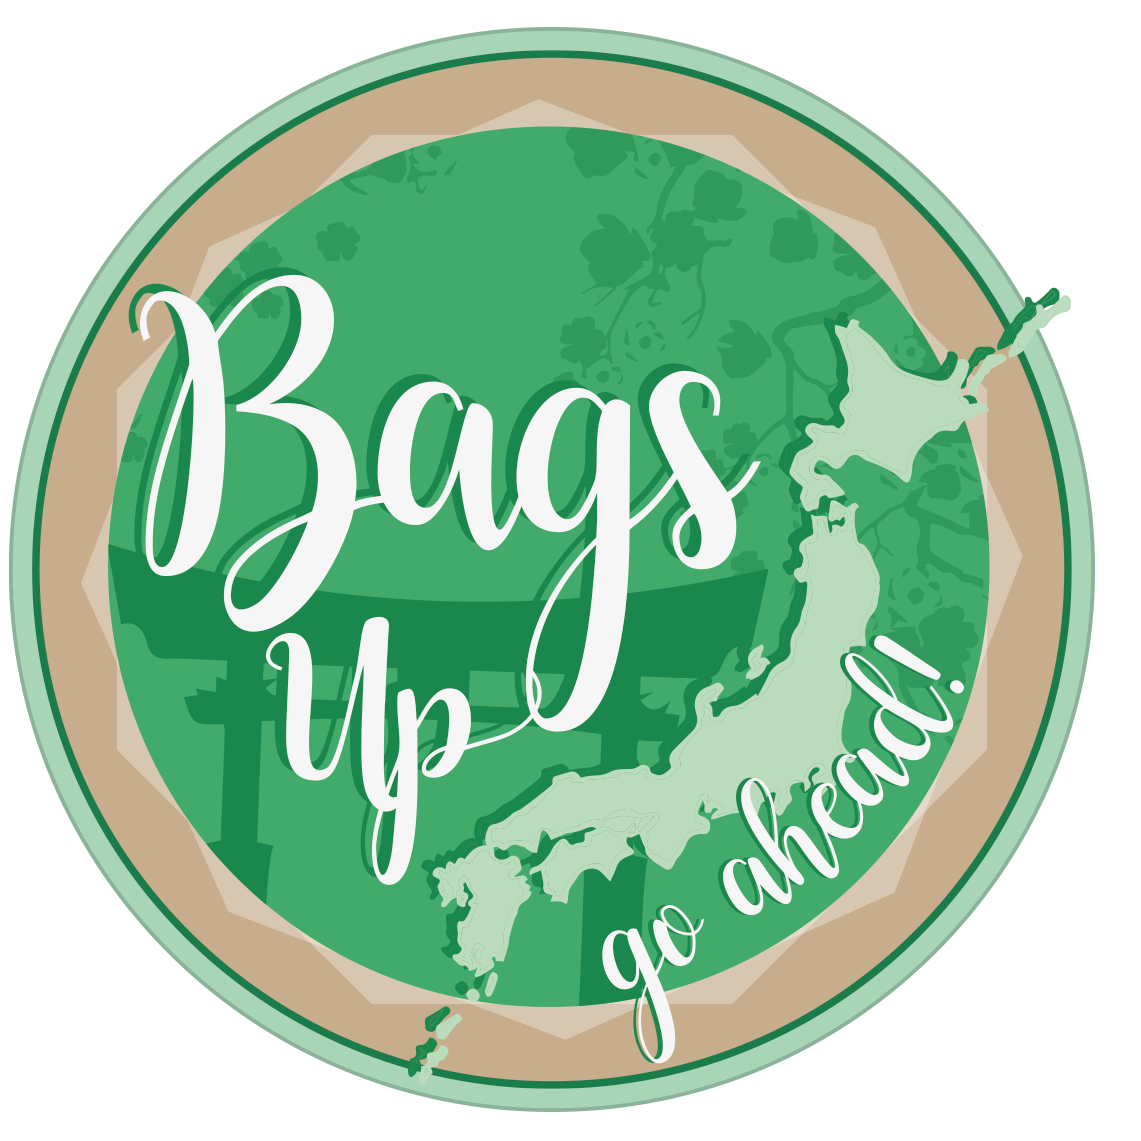 Bags Up- Japan